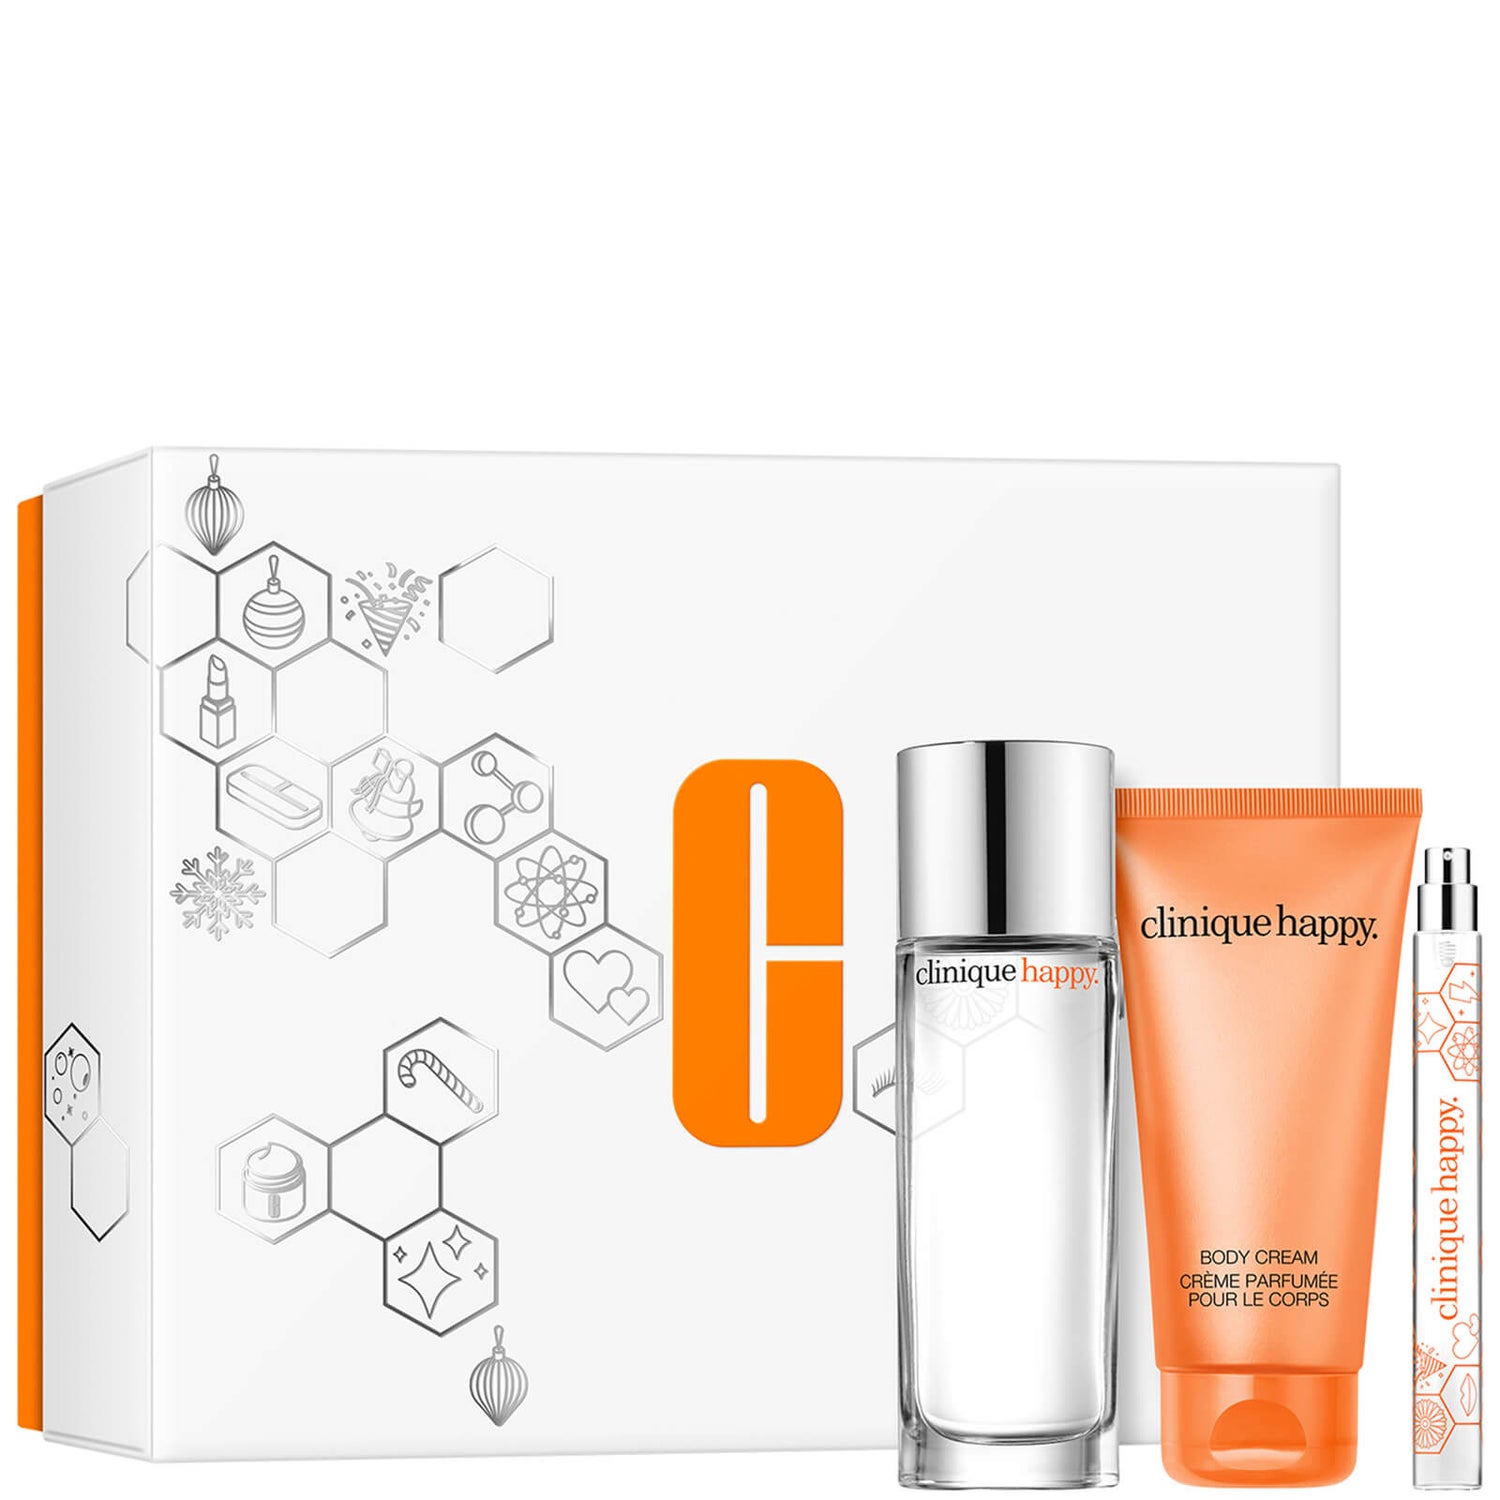 Clinique Perfectly Happy Fragrance Gift Set (Worth £66.91)